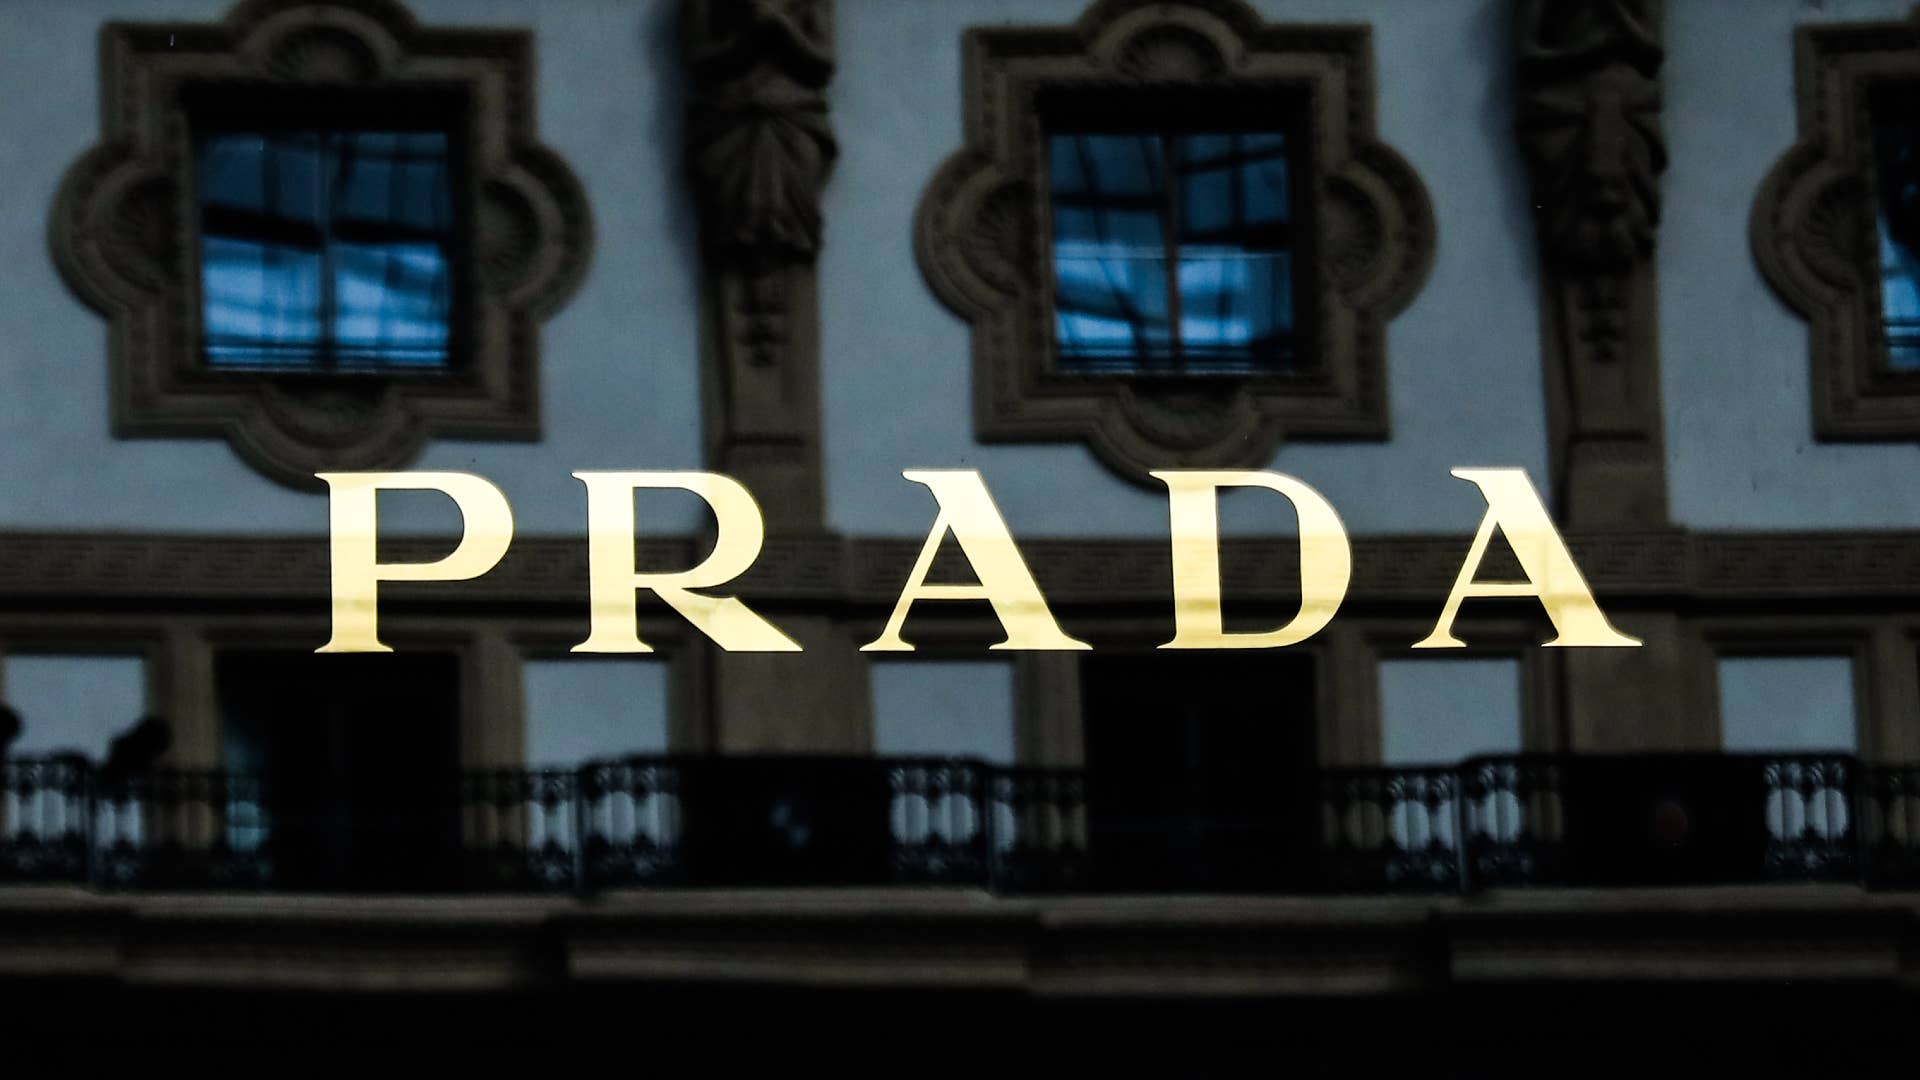 A logo for the Prada brand is pictured